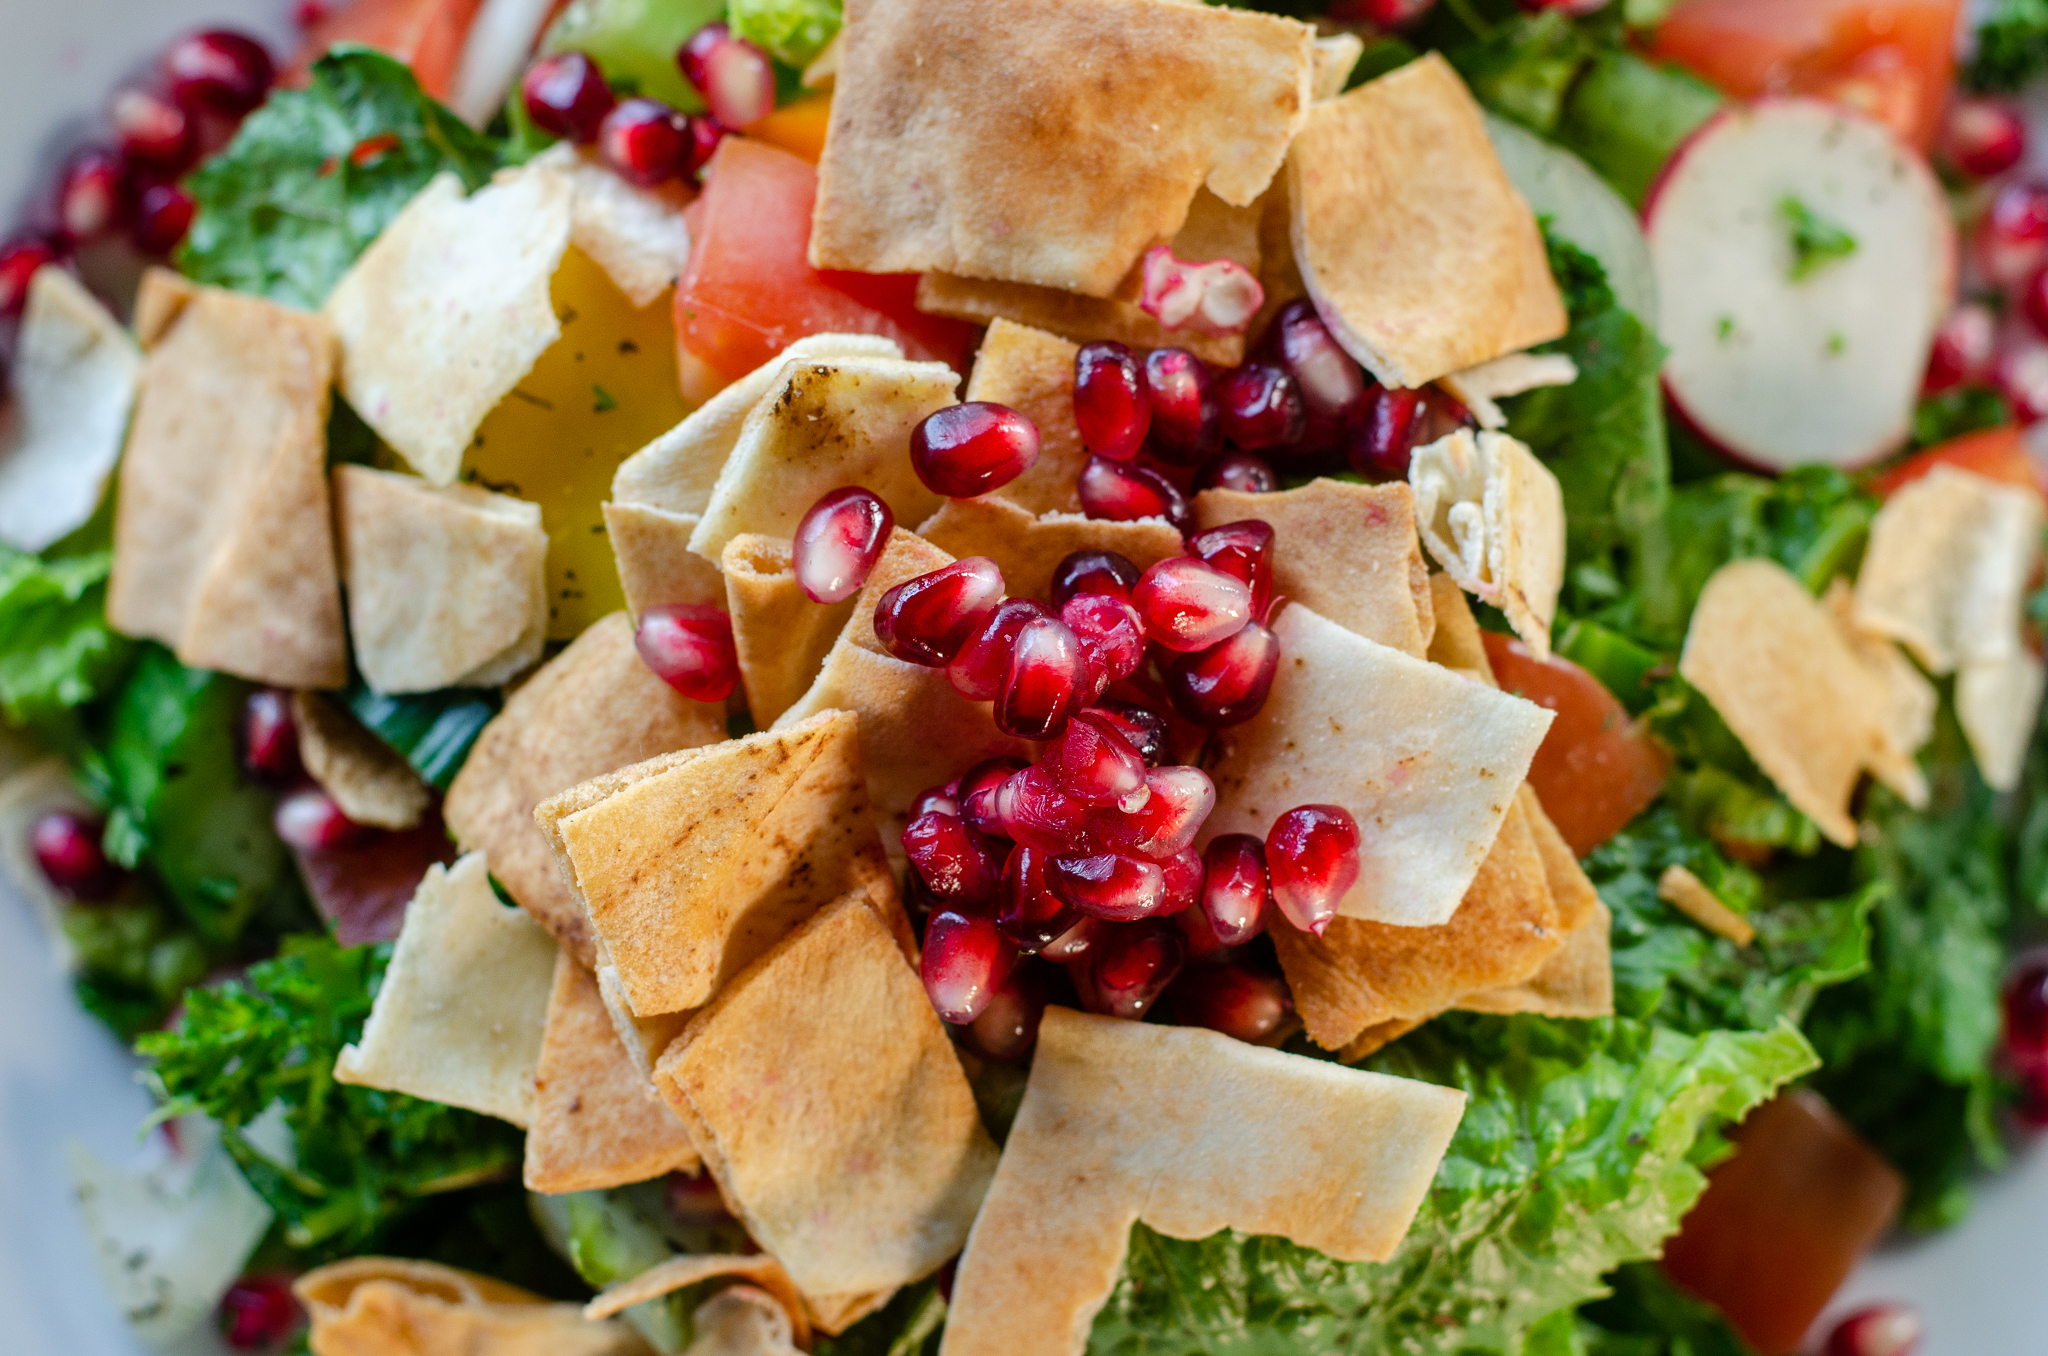 Fattoush salad from Souq in Windsor, Ontario.